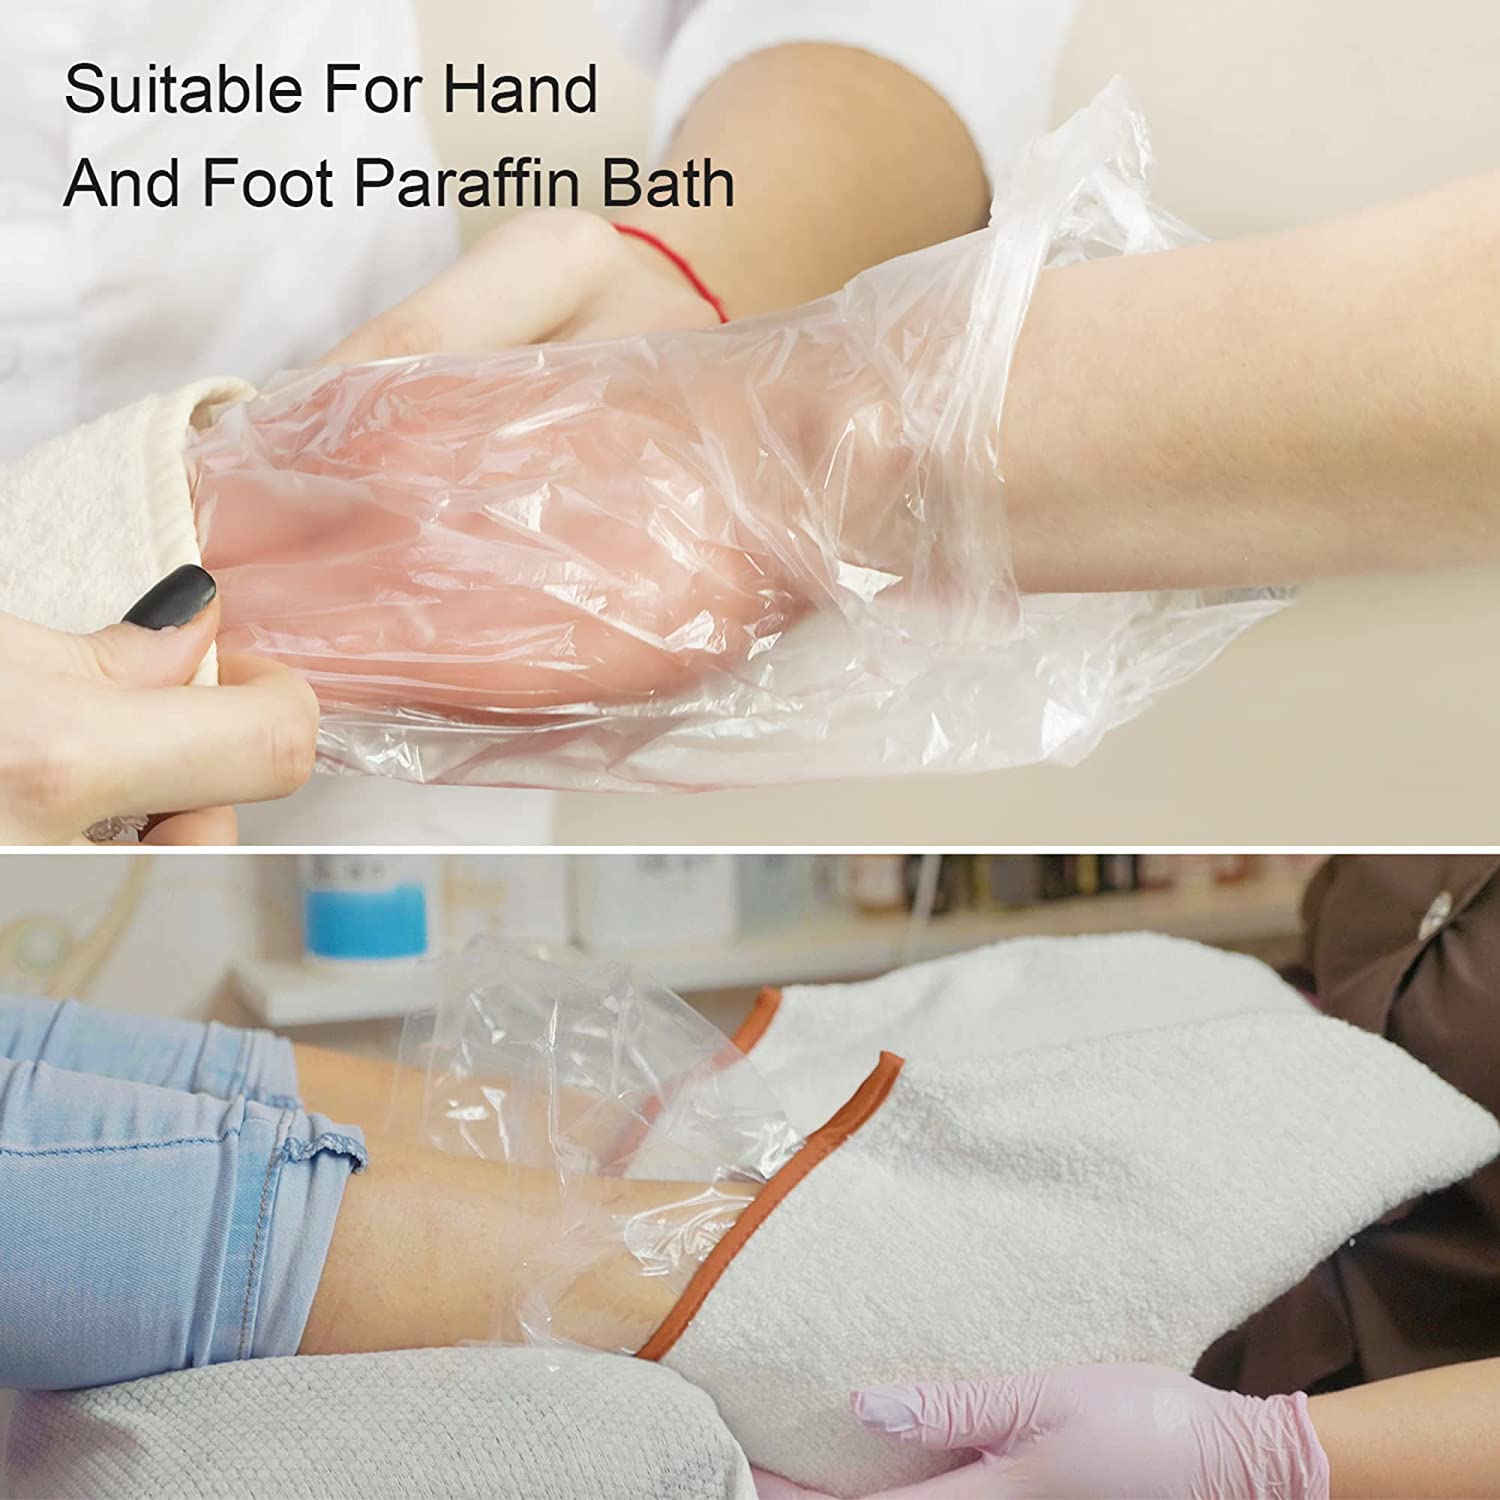 Hydra-Fin / Paraffin Disposable Hand and Foot Liners | NUDE U PERSONAL CARE NUDE U 